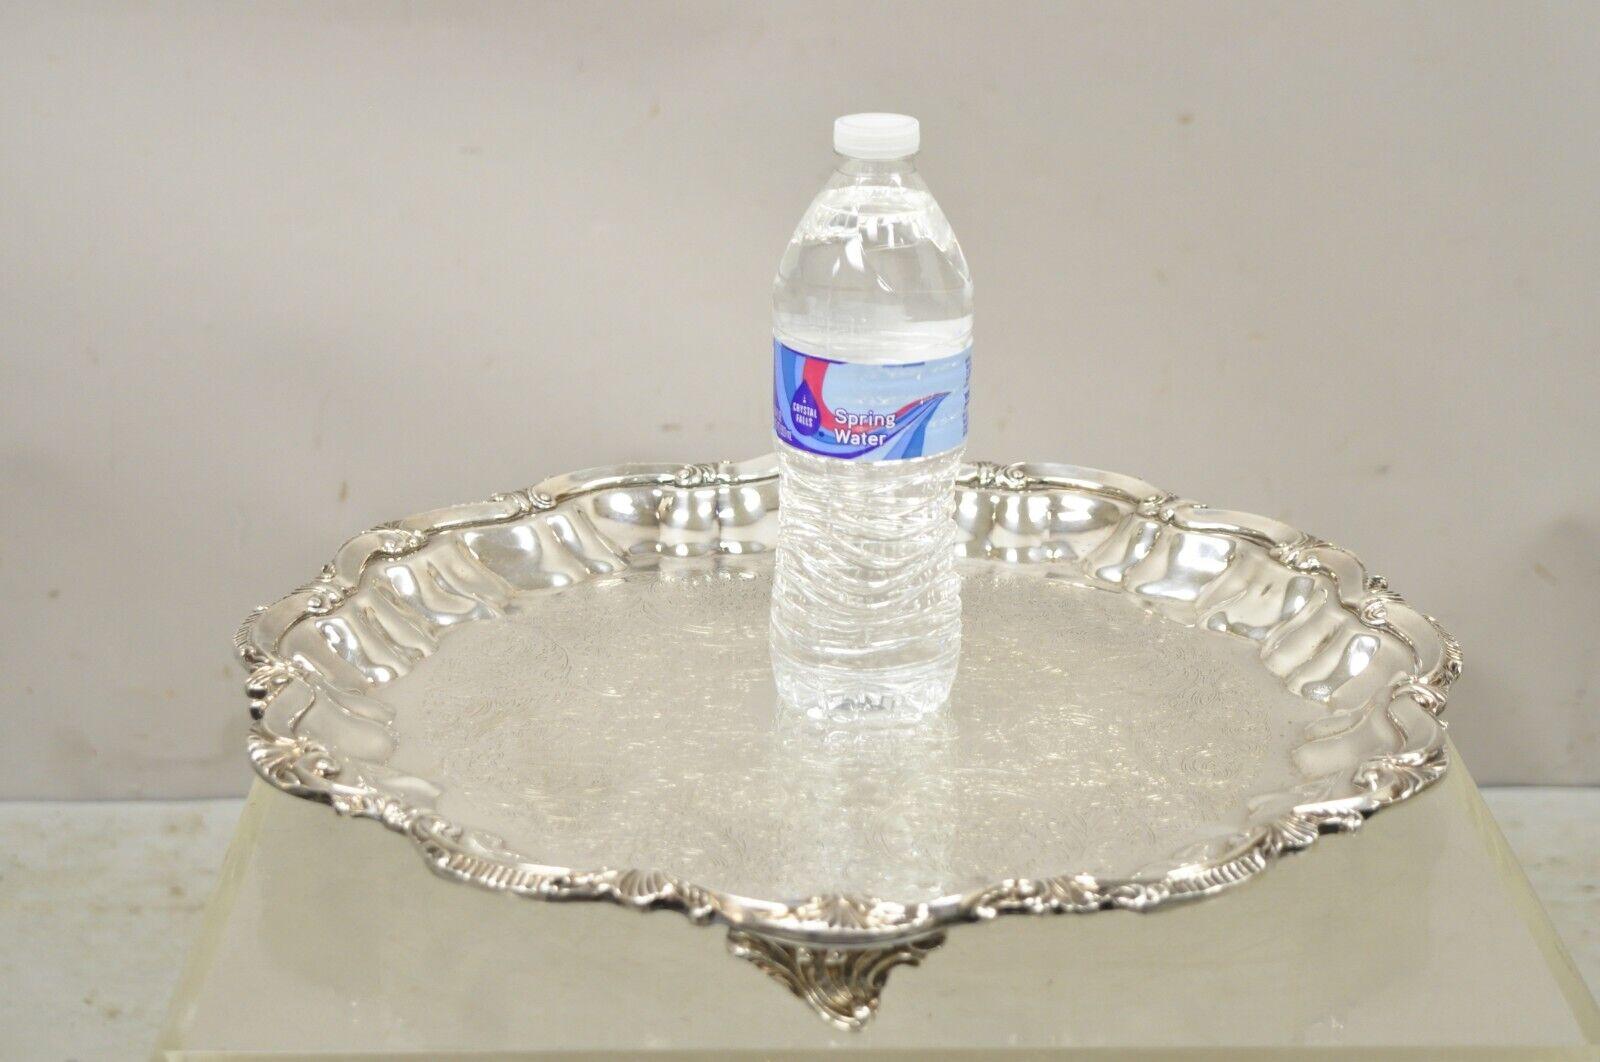 BSC English Silver Plated Victorian Style Round Scalloped Serving Platter Tray. Item features ornate Etched Center, Raised on 3 feet, Original Hallmark. Circa Mid 20th Century. Measurements: 1.5